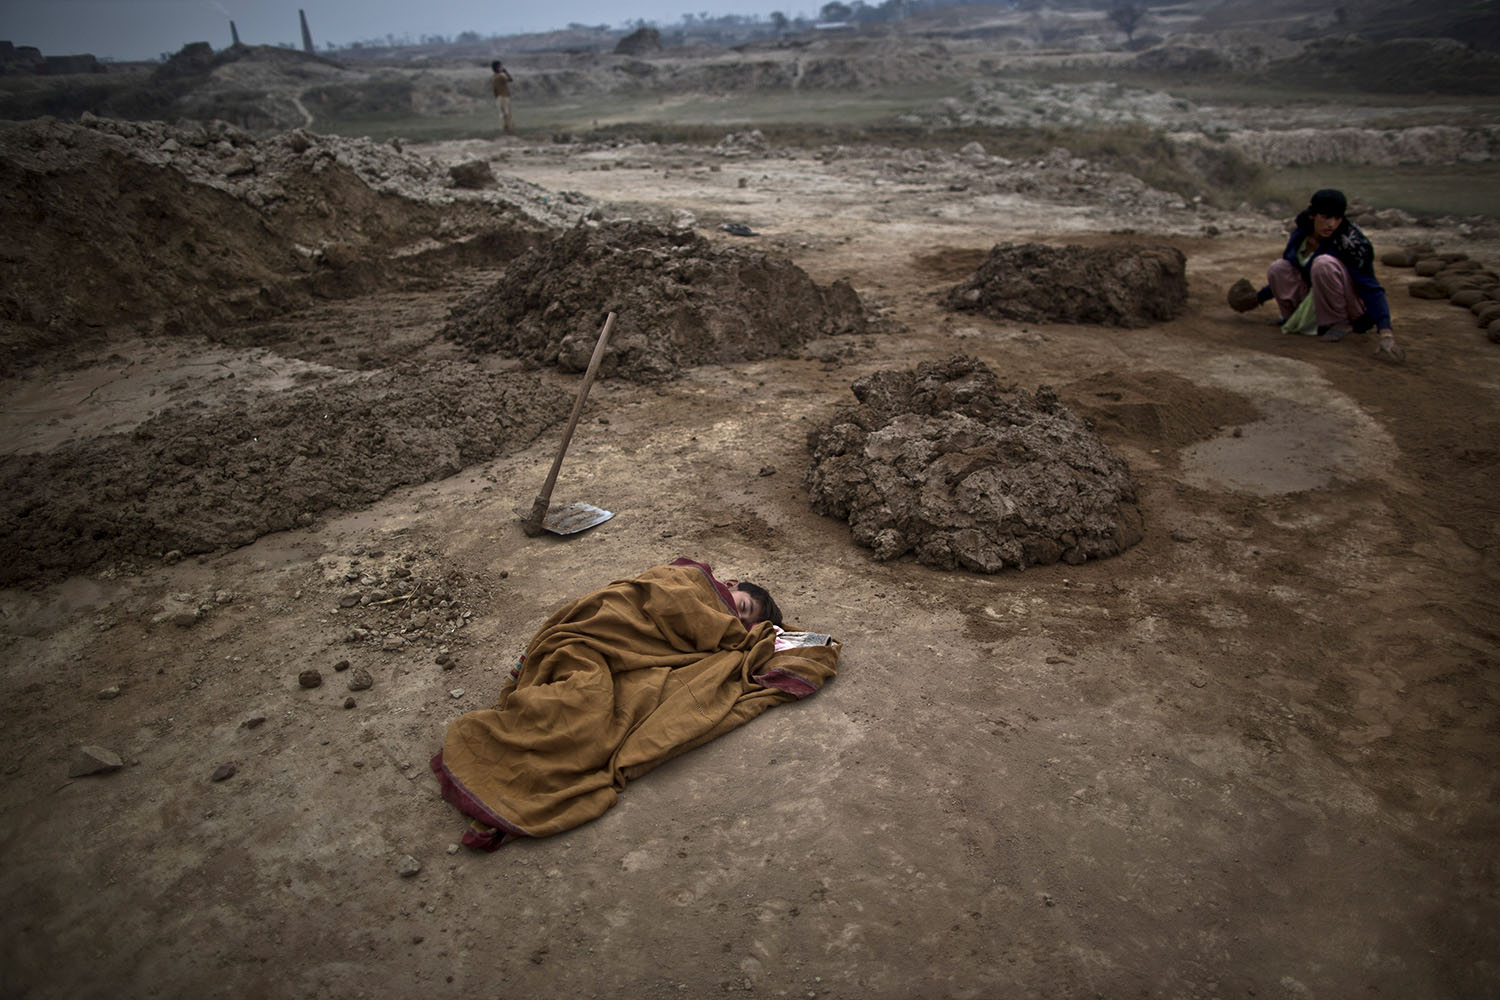 Mar. 3, 2014. 6-year-old Adil Shahid, suffering from a fever, sleeps on the ground wrapped with a shawl, next to the brick factory where his mother works in Mandra, near Rawalpindi, Pakistan.